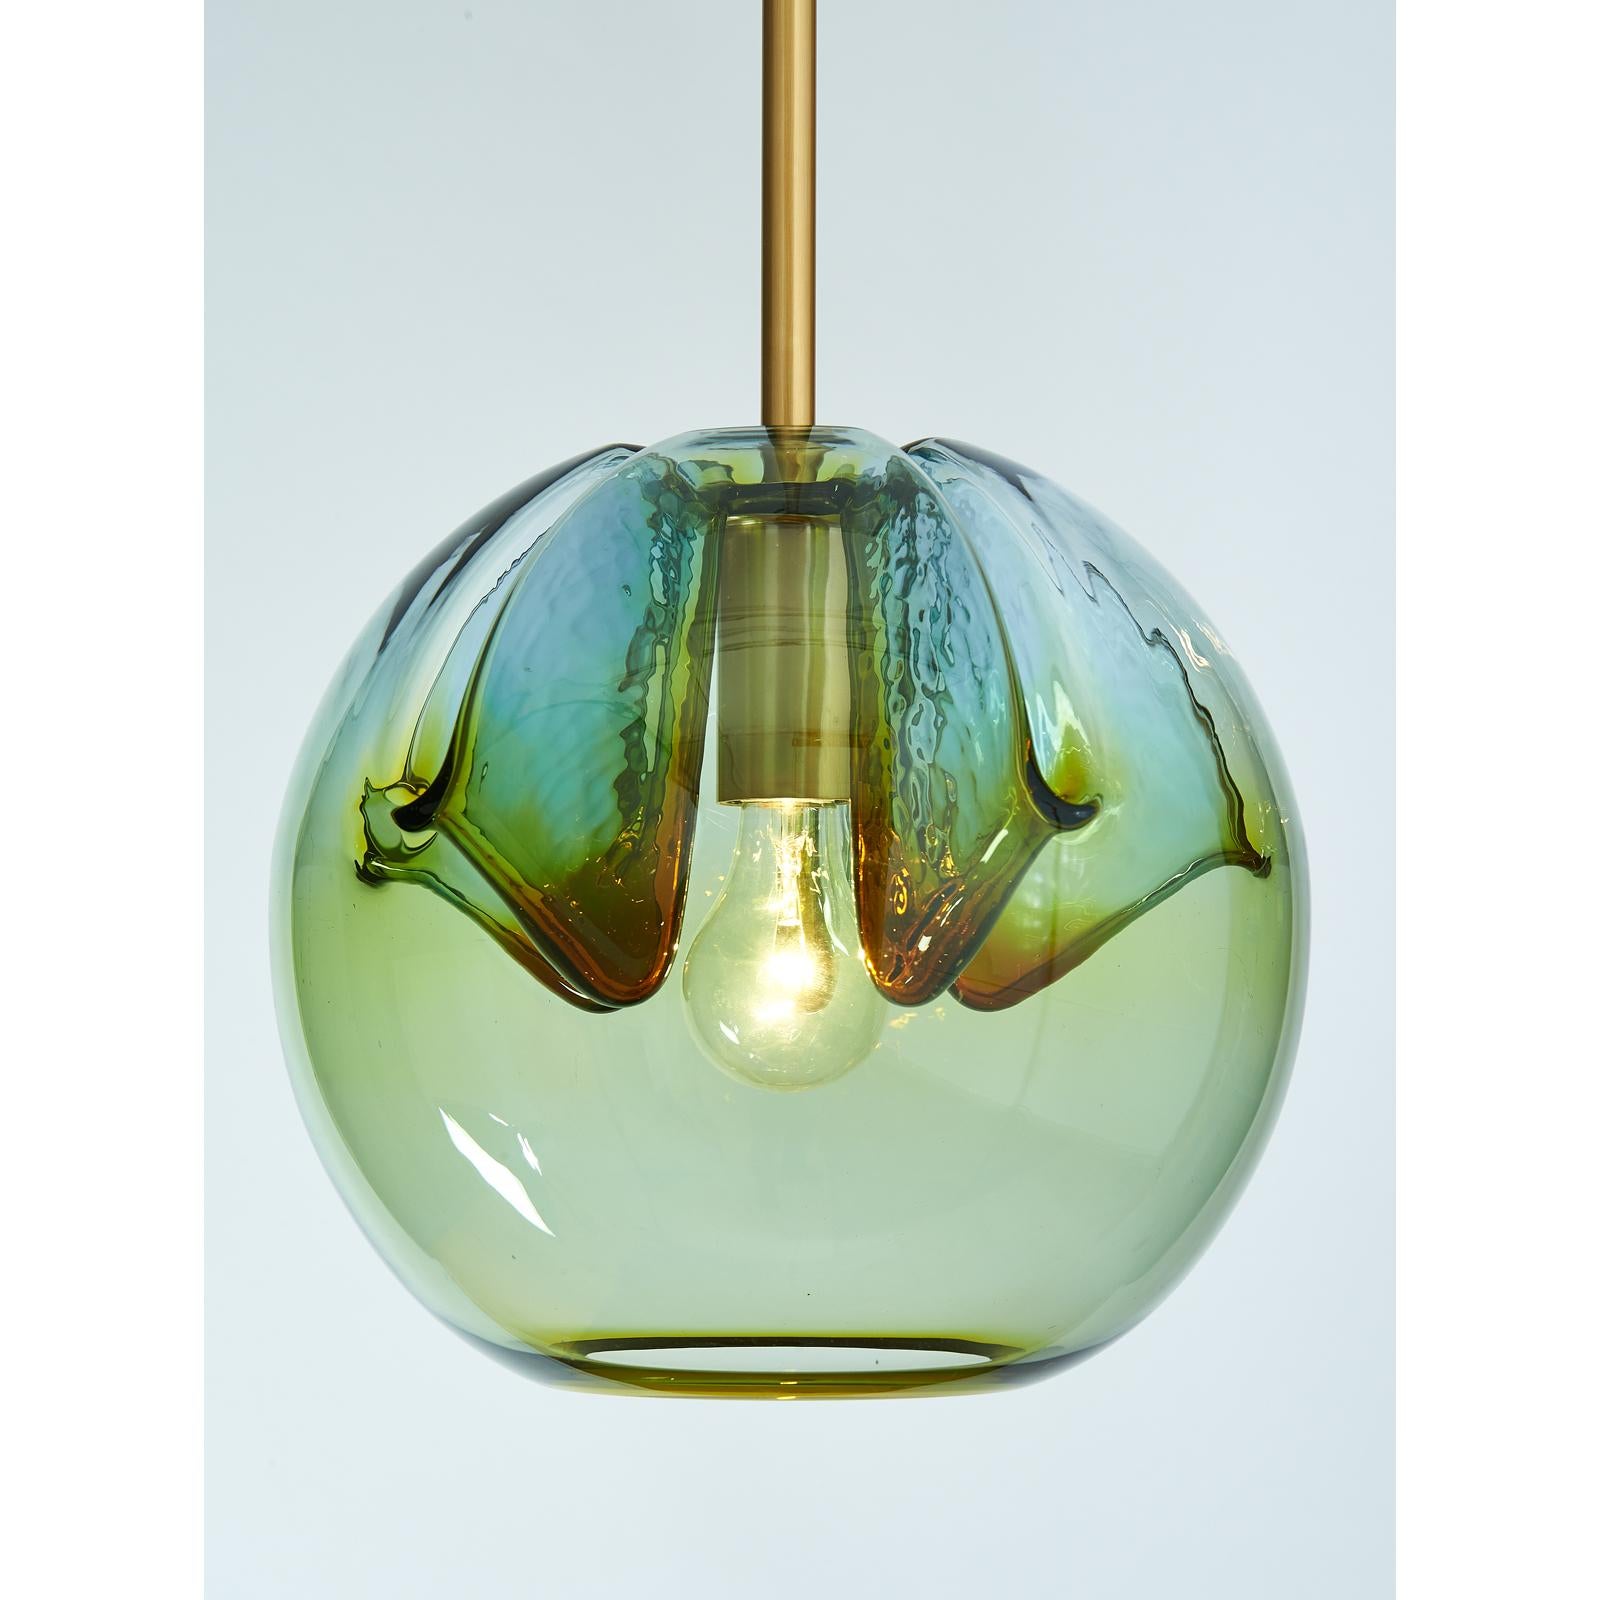 Italy, 1970s
Vintage blown colored glass globes, repurposed in our workshops as lanterns, with satin polished brass mounts. Artisanally mouth blown, the ensemble is unified but each globe has its own variation in hues. See last photo for variations.